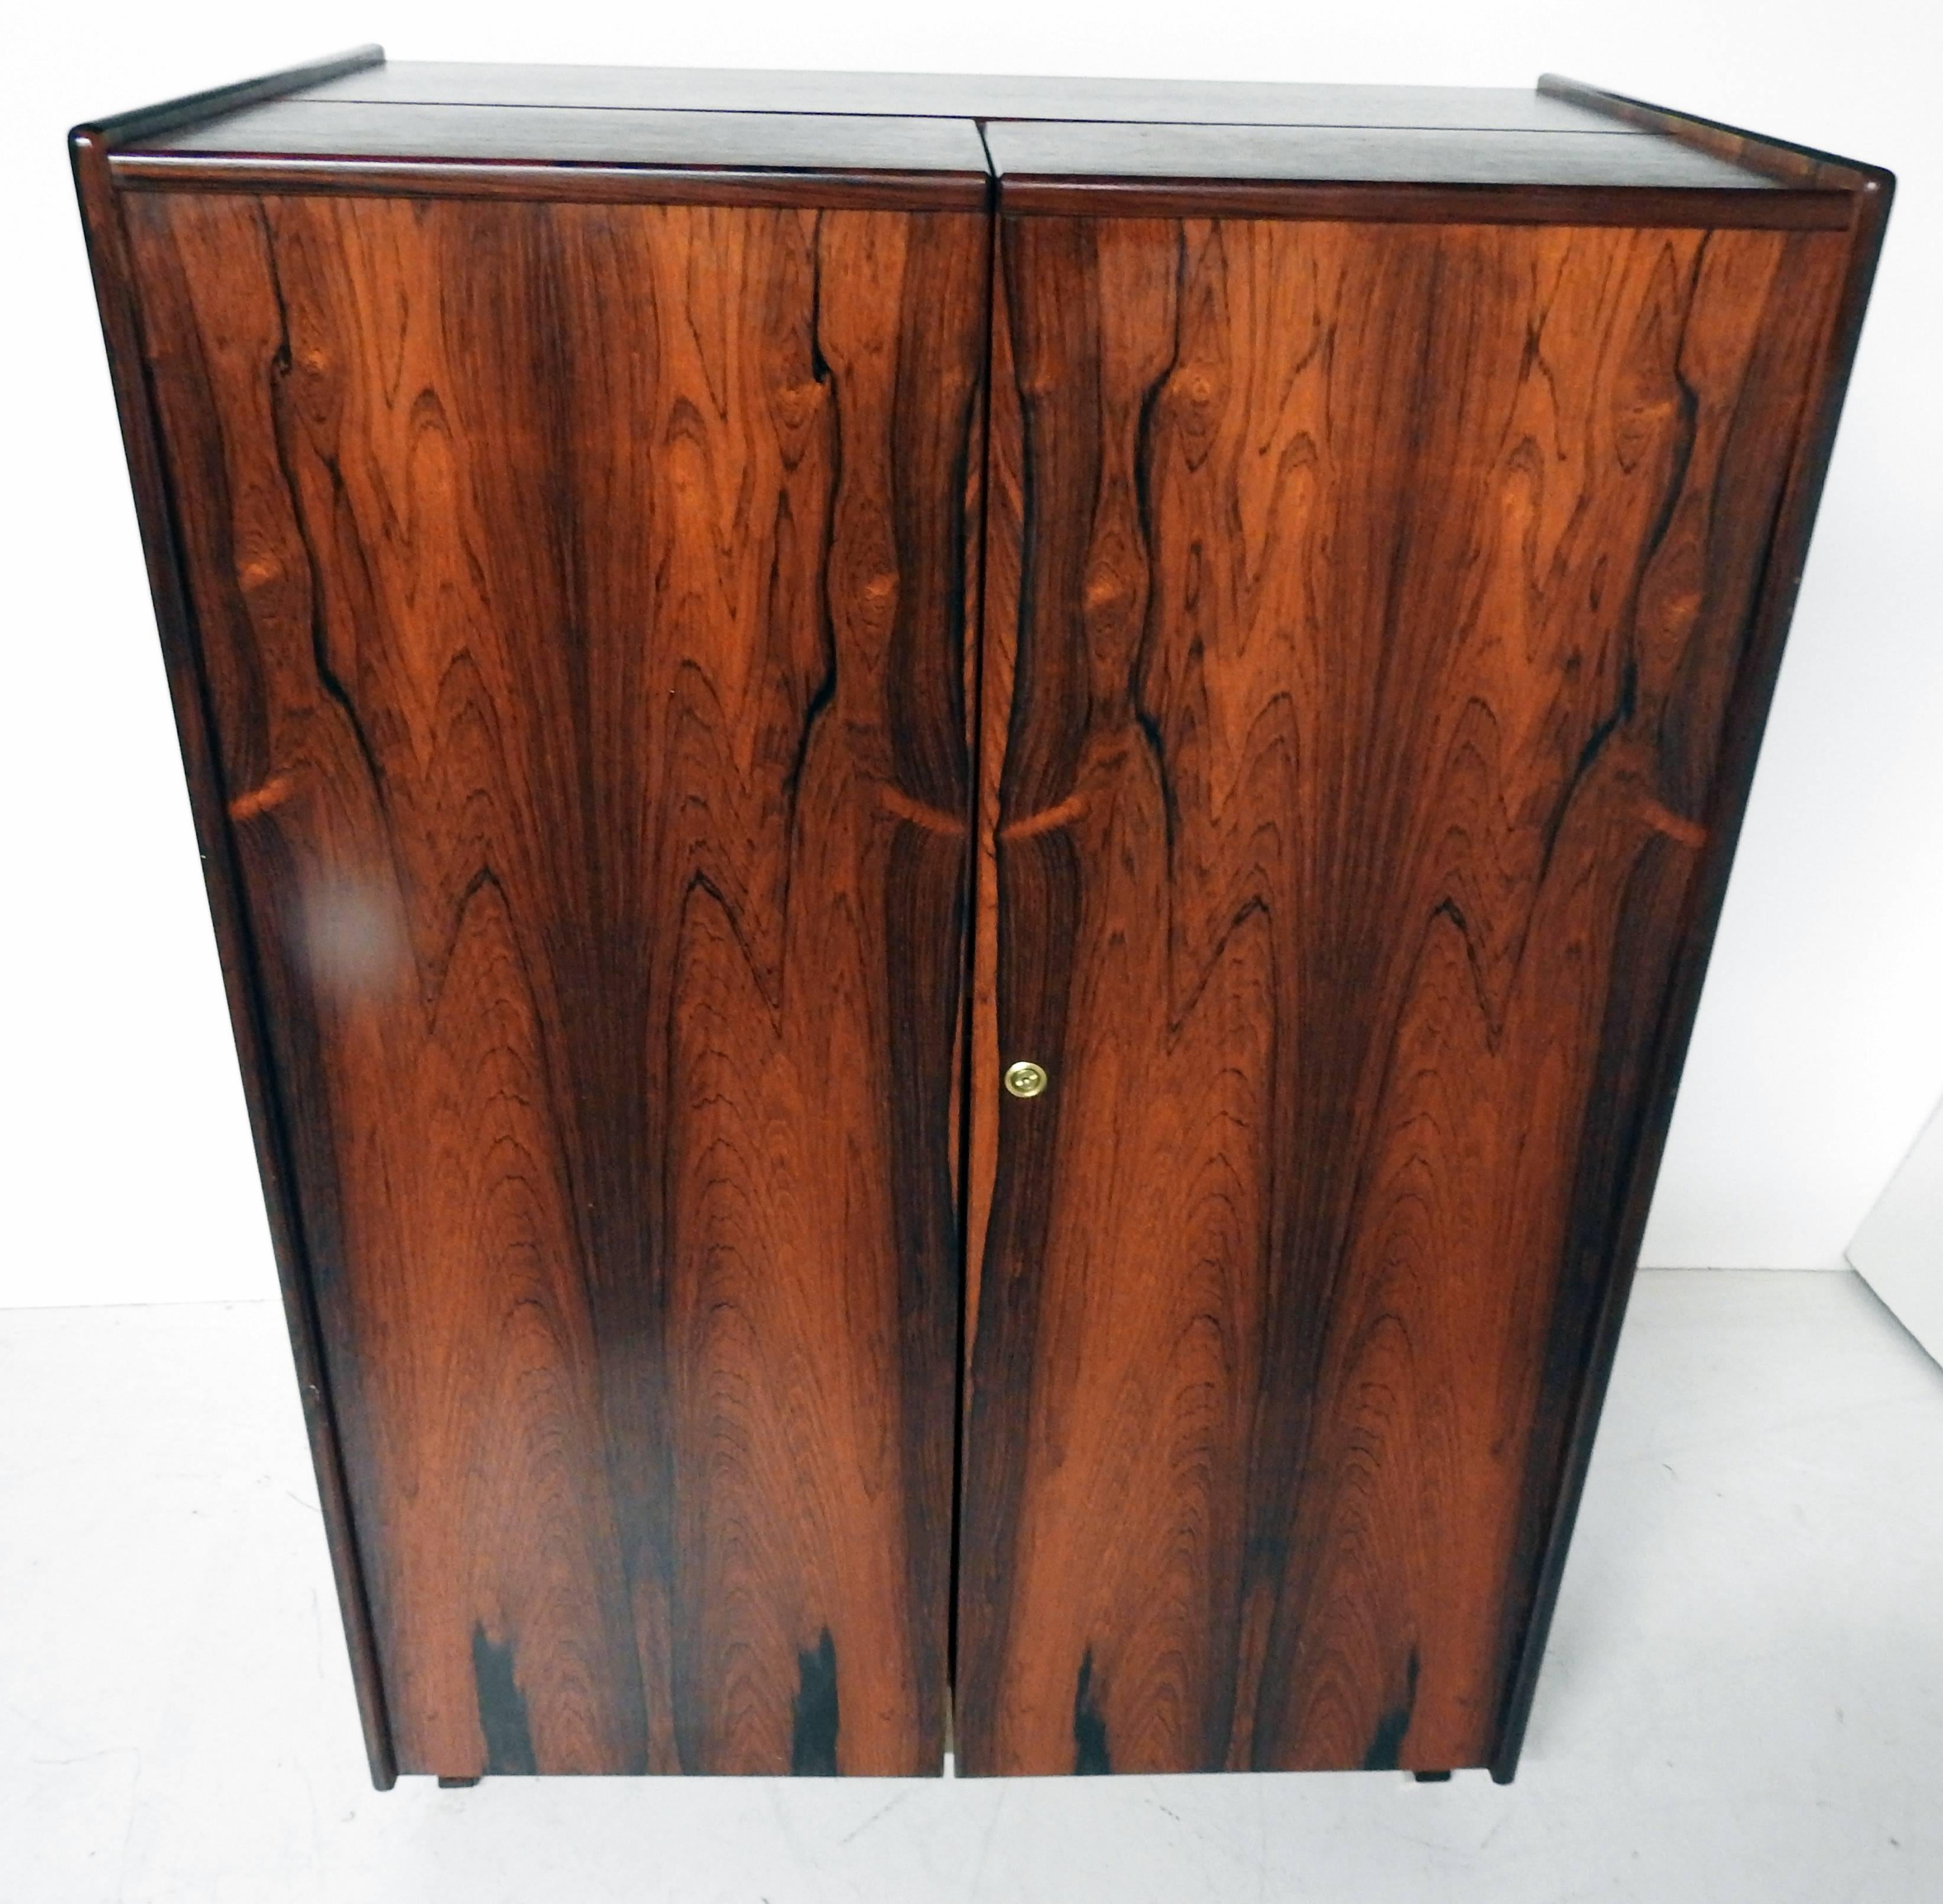 Cabinet form with two hinged doors that open to expose a full desk that slides out with a drawer and shelves.